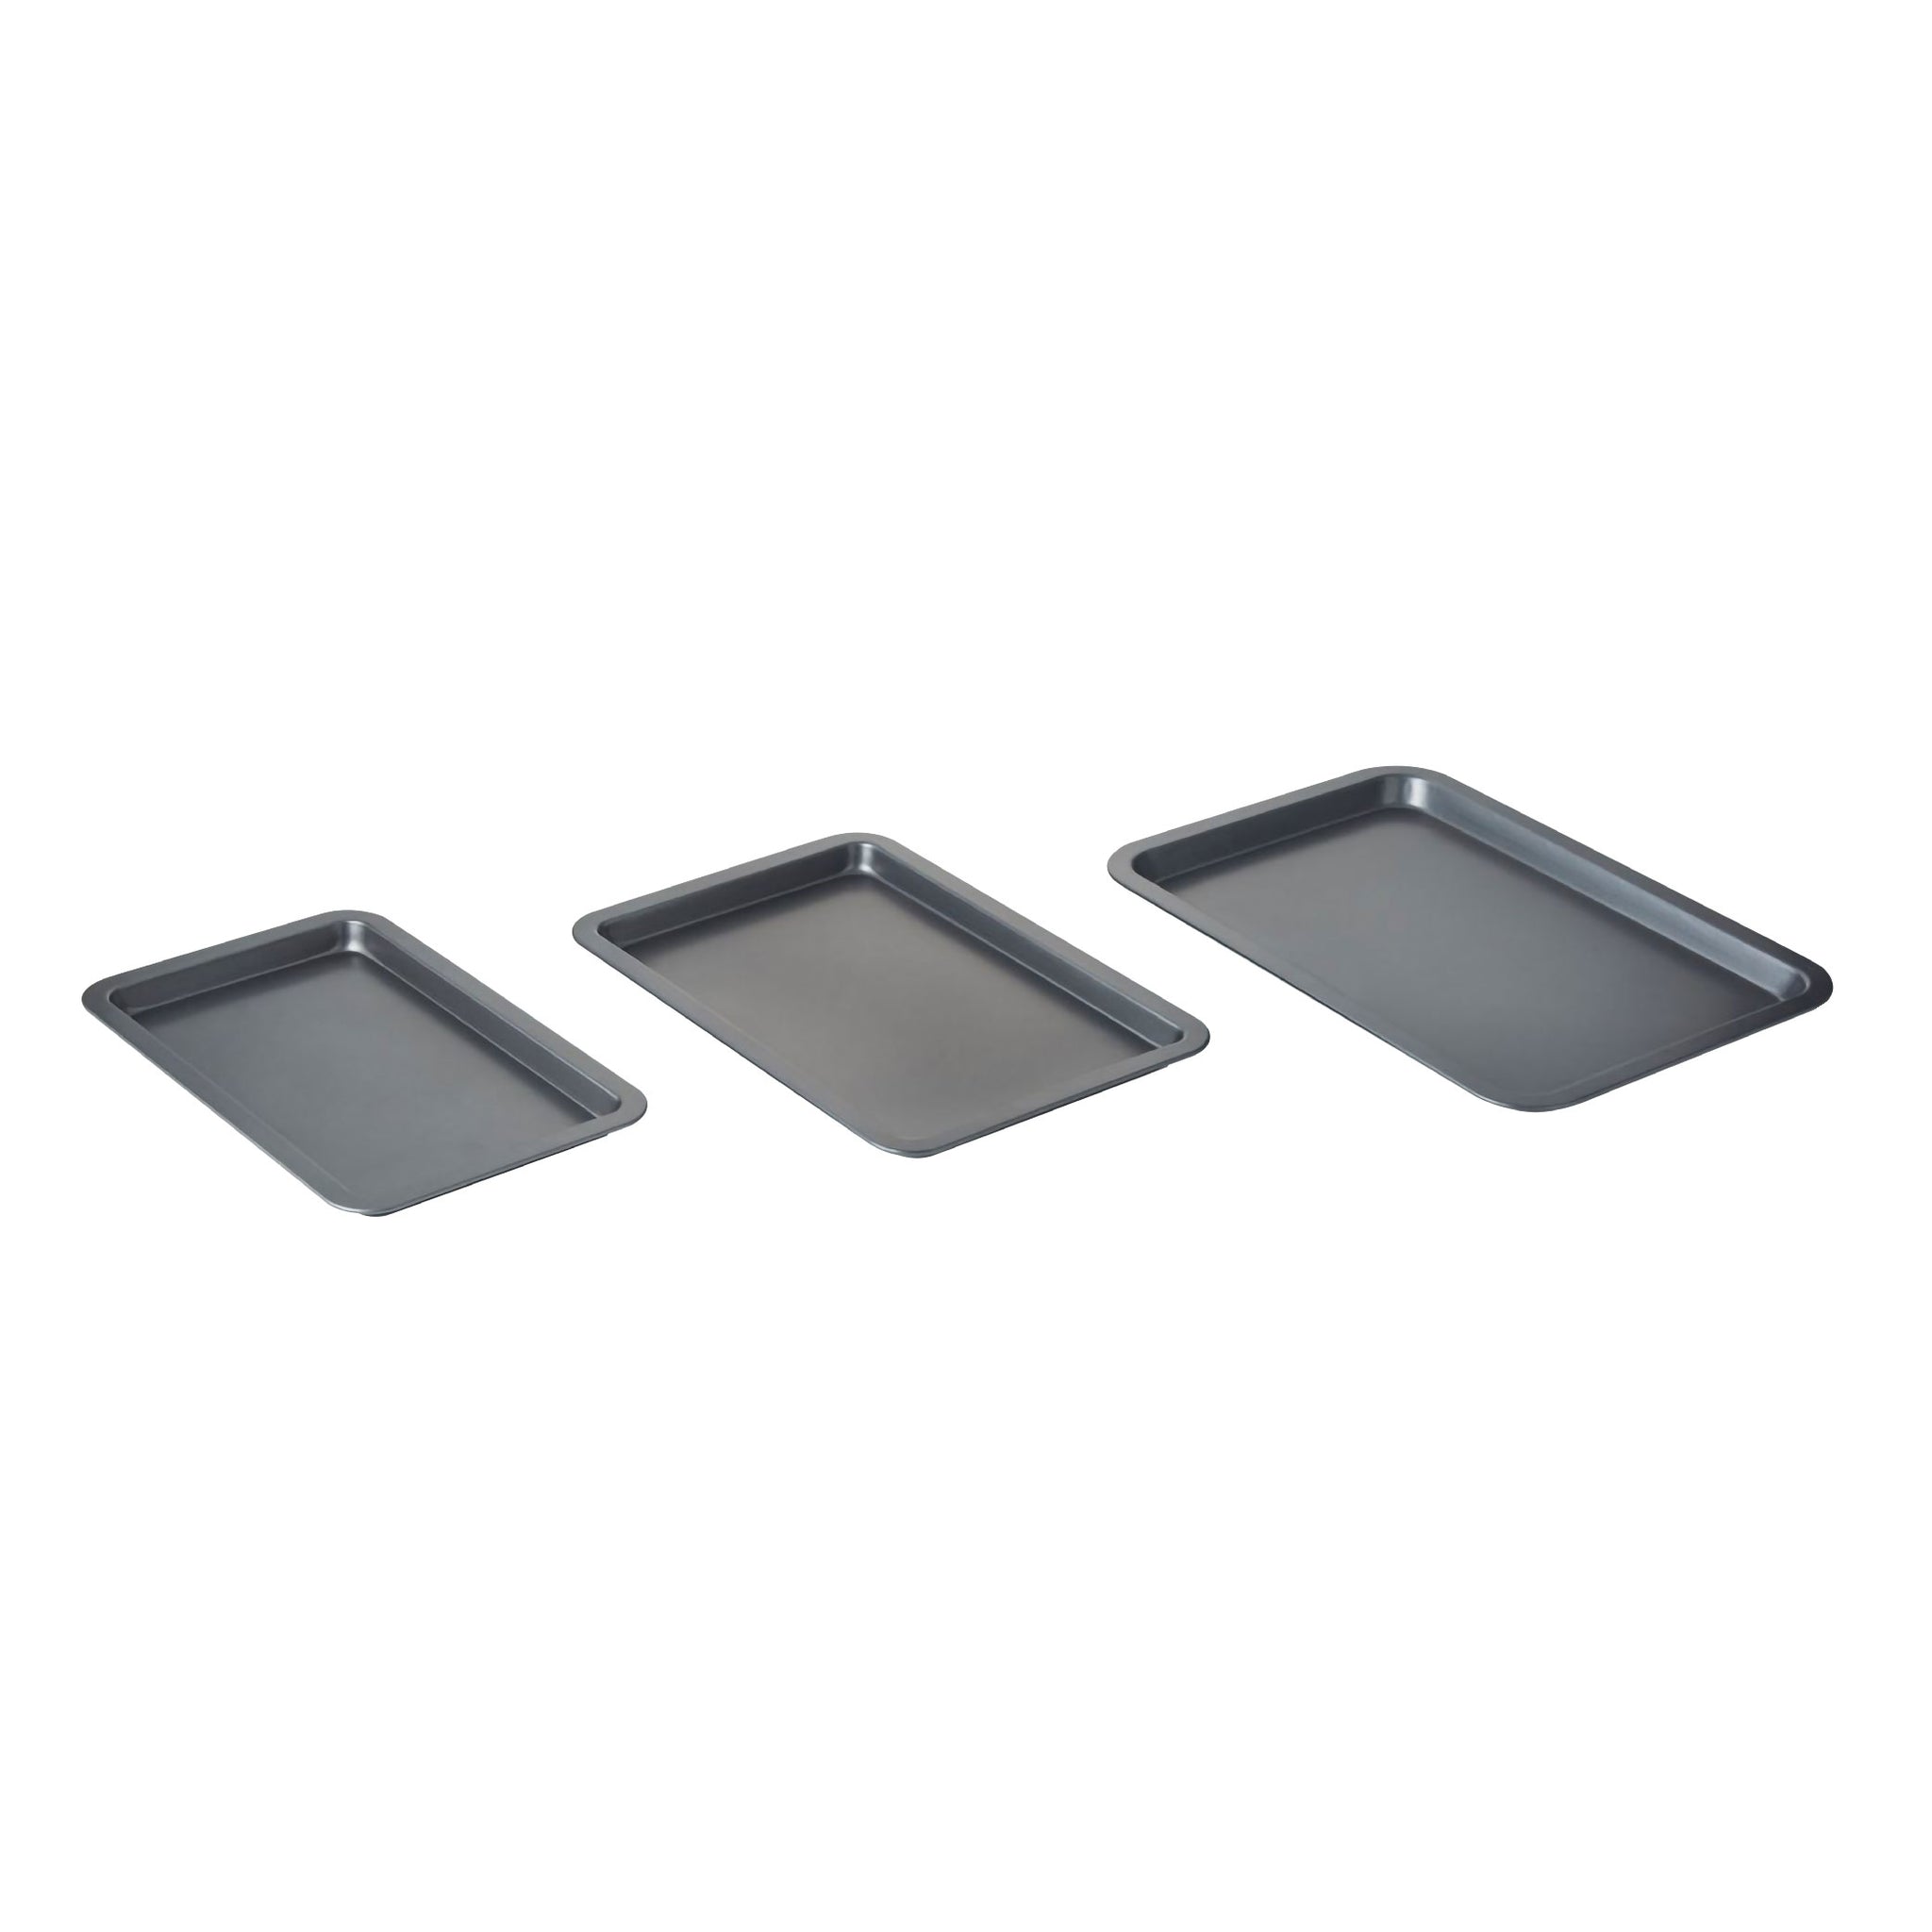 Set of 3 Non-Stick Cookie and Baking Sheets by Nifty – Nifty Home Products